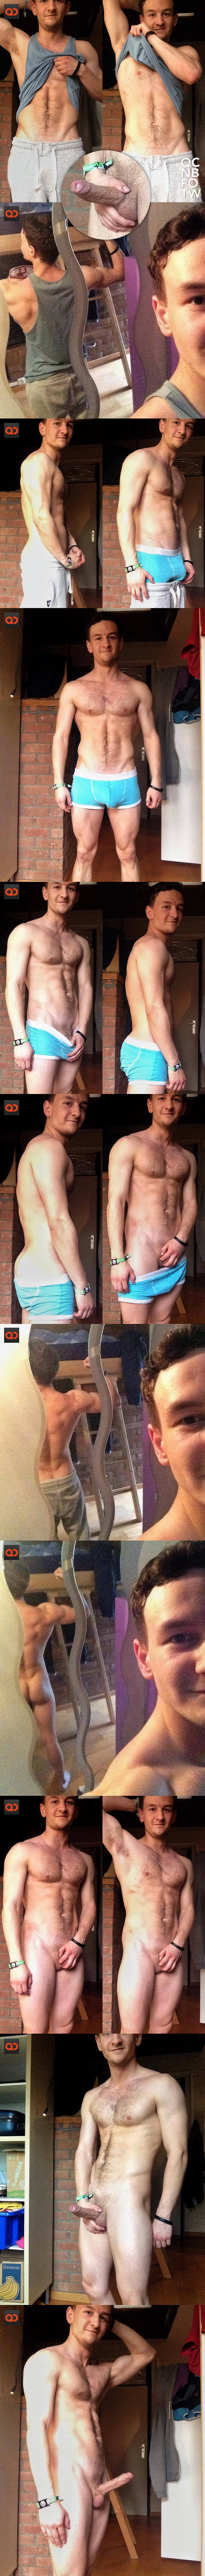 nude_bf_of_the_week-hefty_looking_cock-collage01